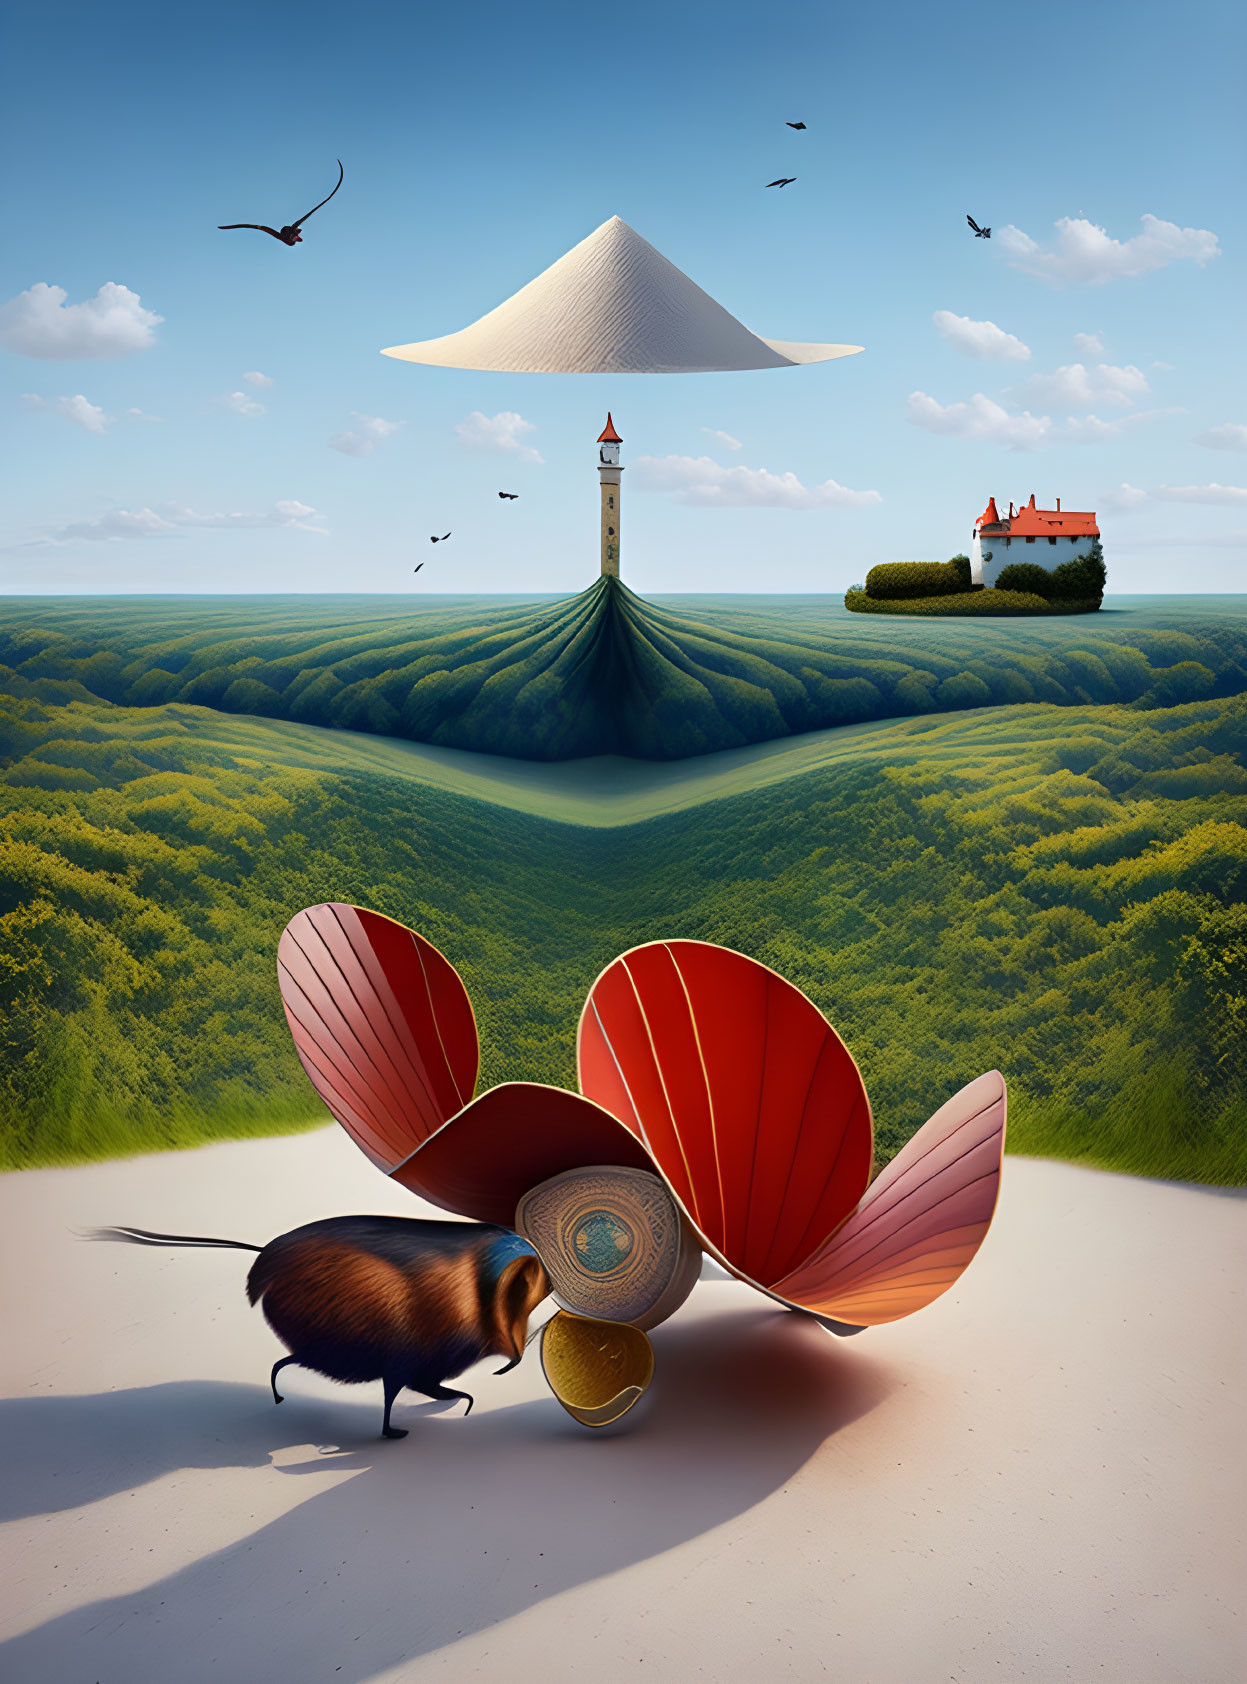 Whimsical landscape with mechanical beetle, plateau house, lighthouse, and birds